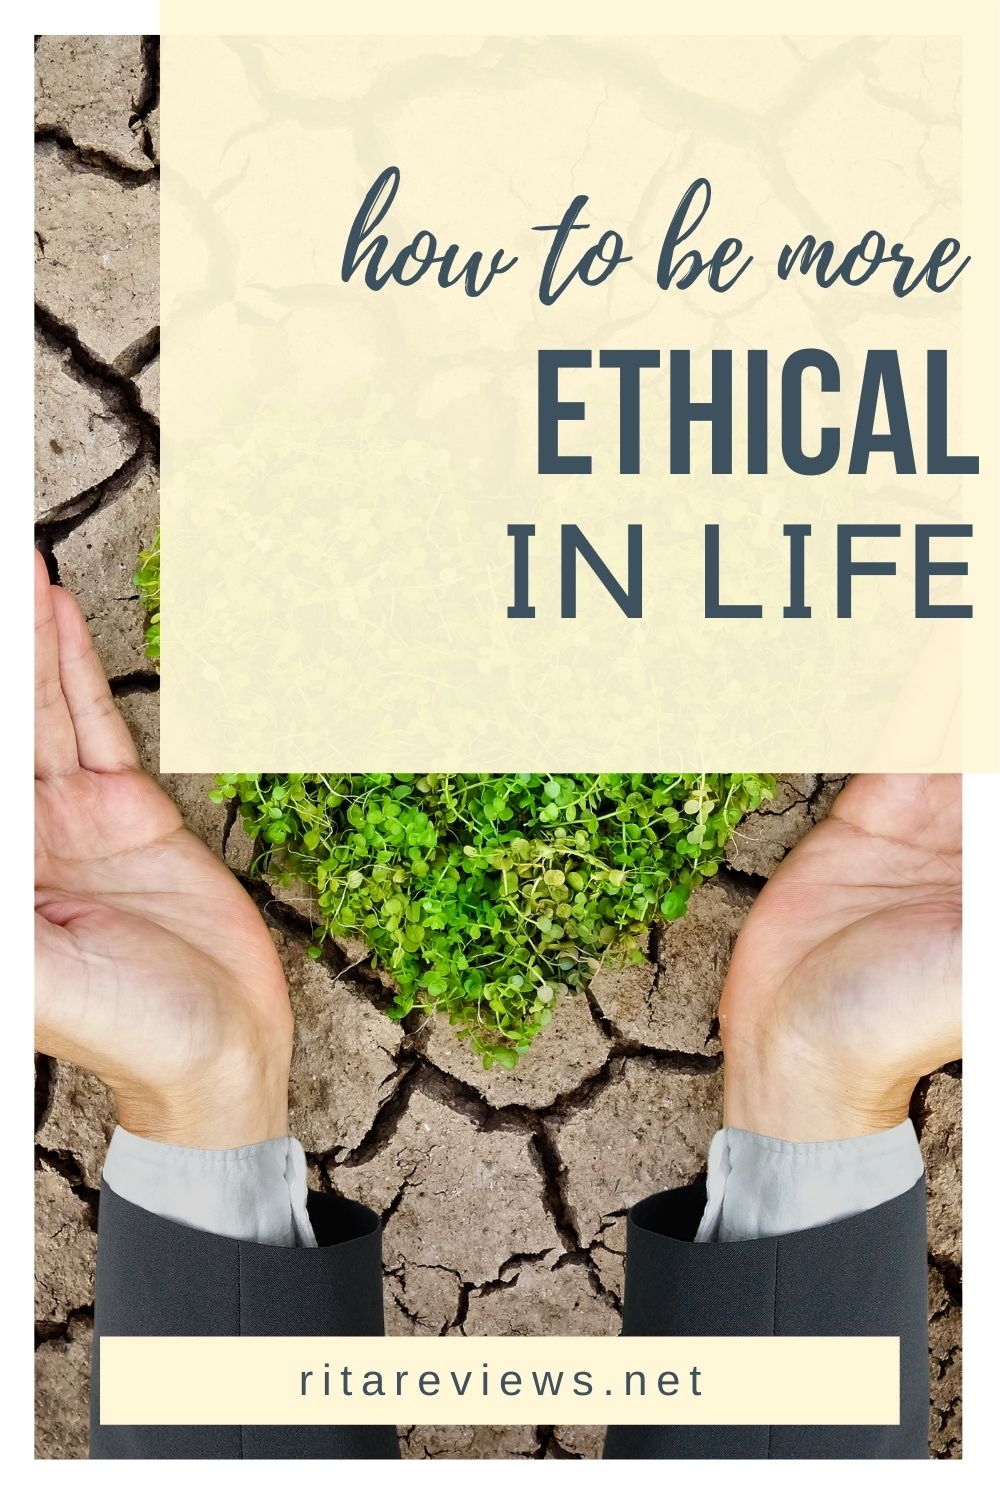 How Can We Become More Ethical In Life